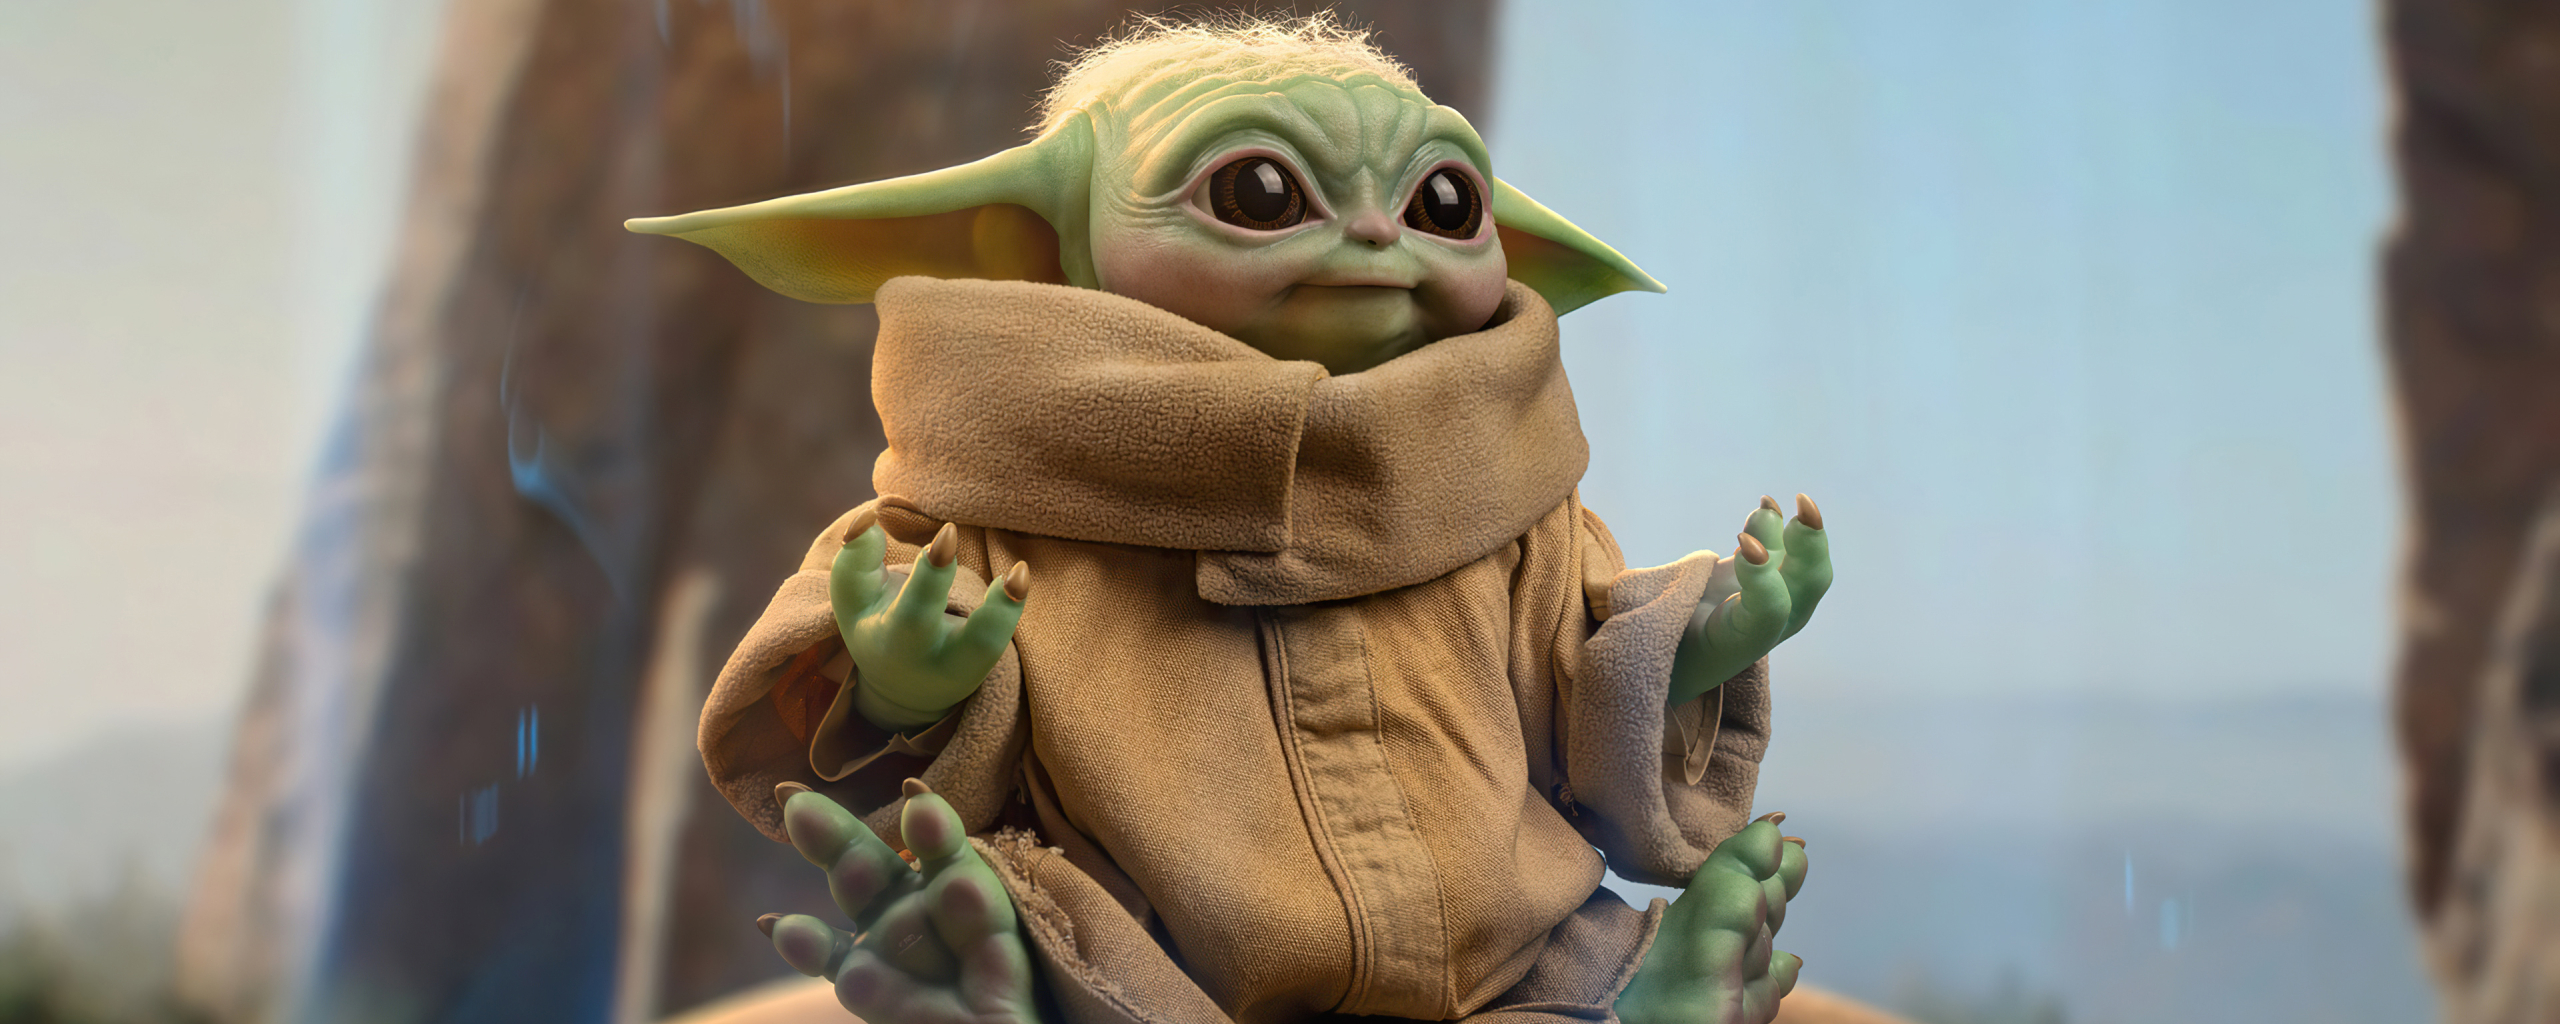 2560x1024 Baby Yoda Grogu Star Wars 21 2560x1024 Resolution Wallpaper Hd Tv Series 4k Wallpapers Images Photos And Background Wallpapers Den